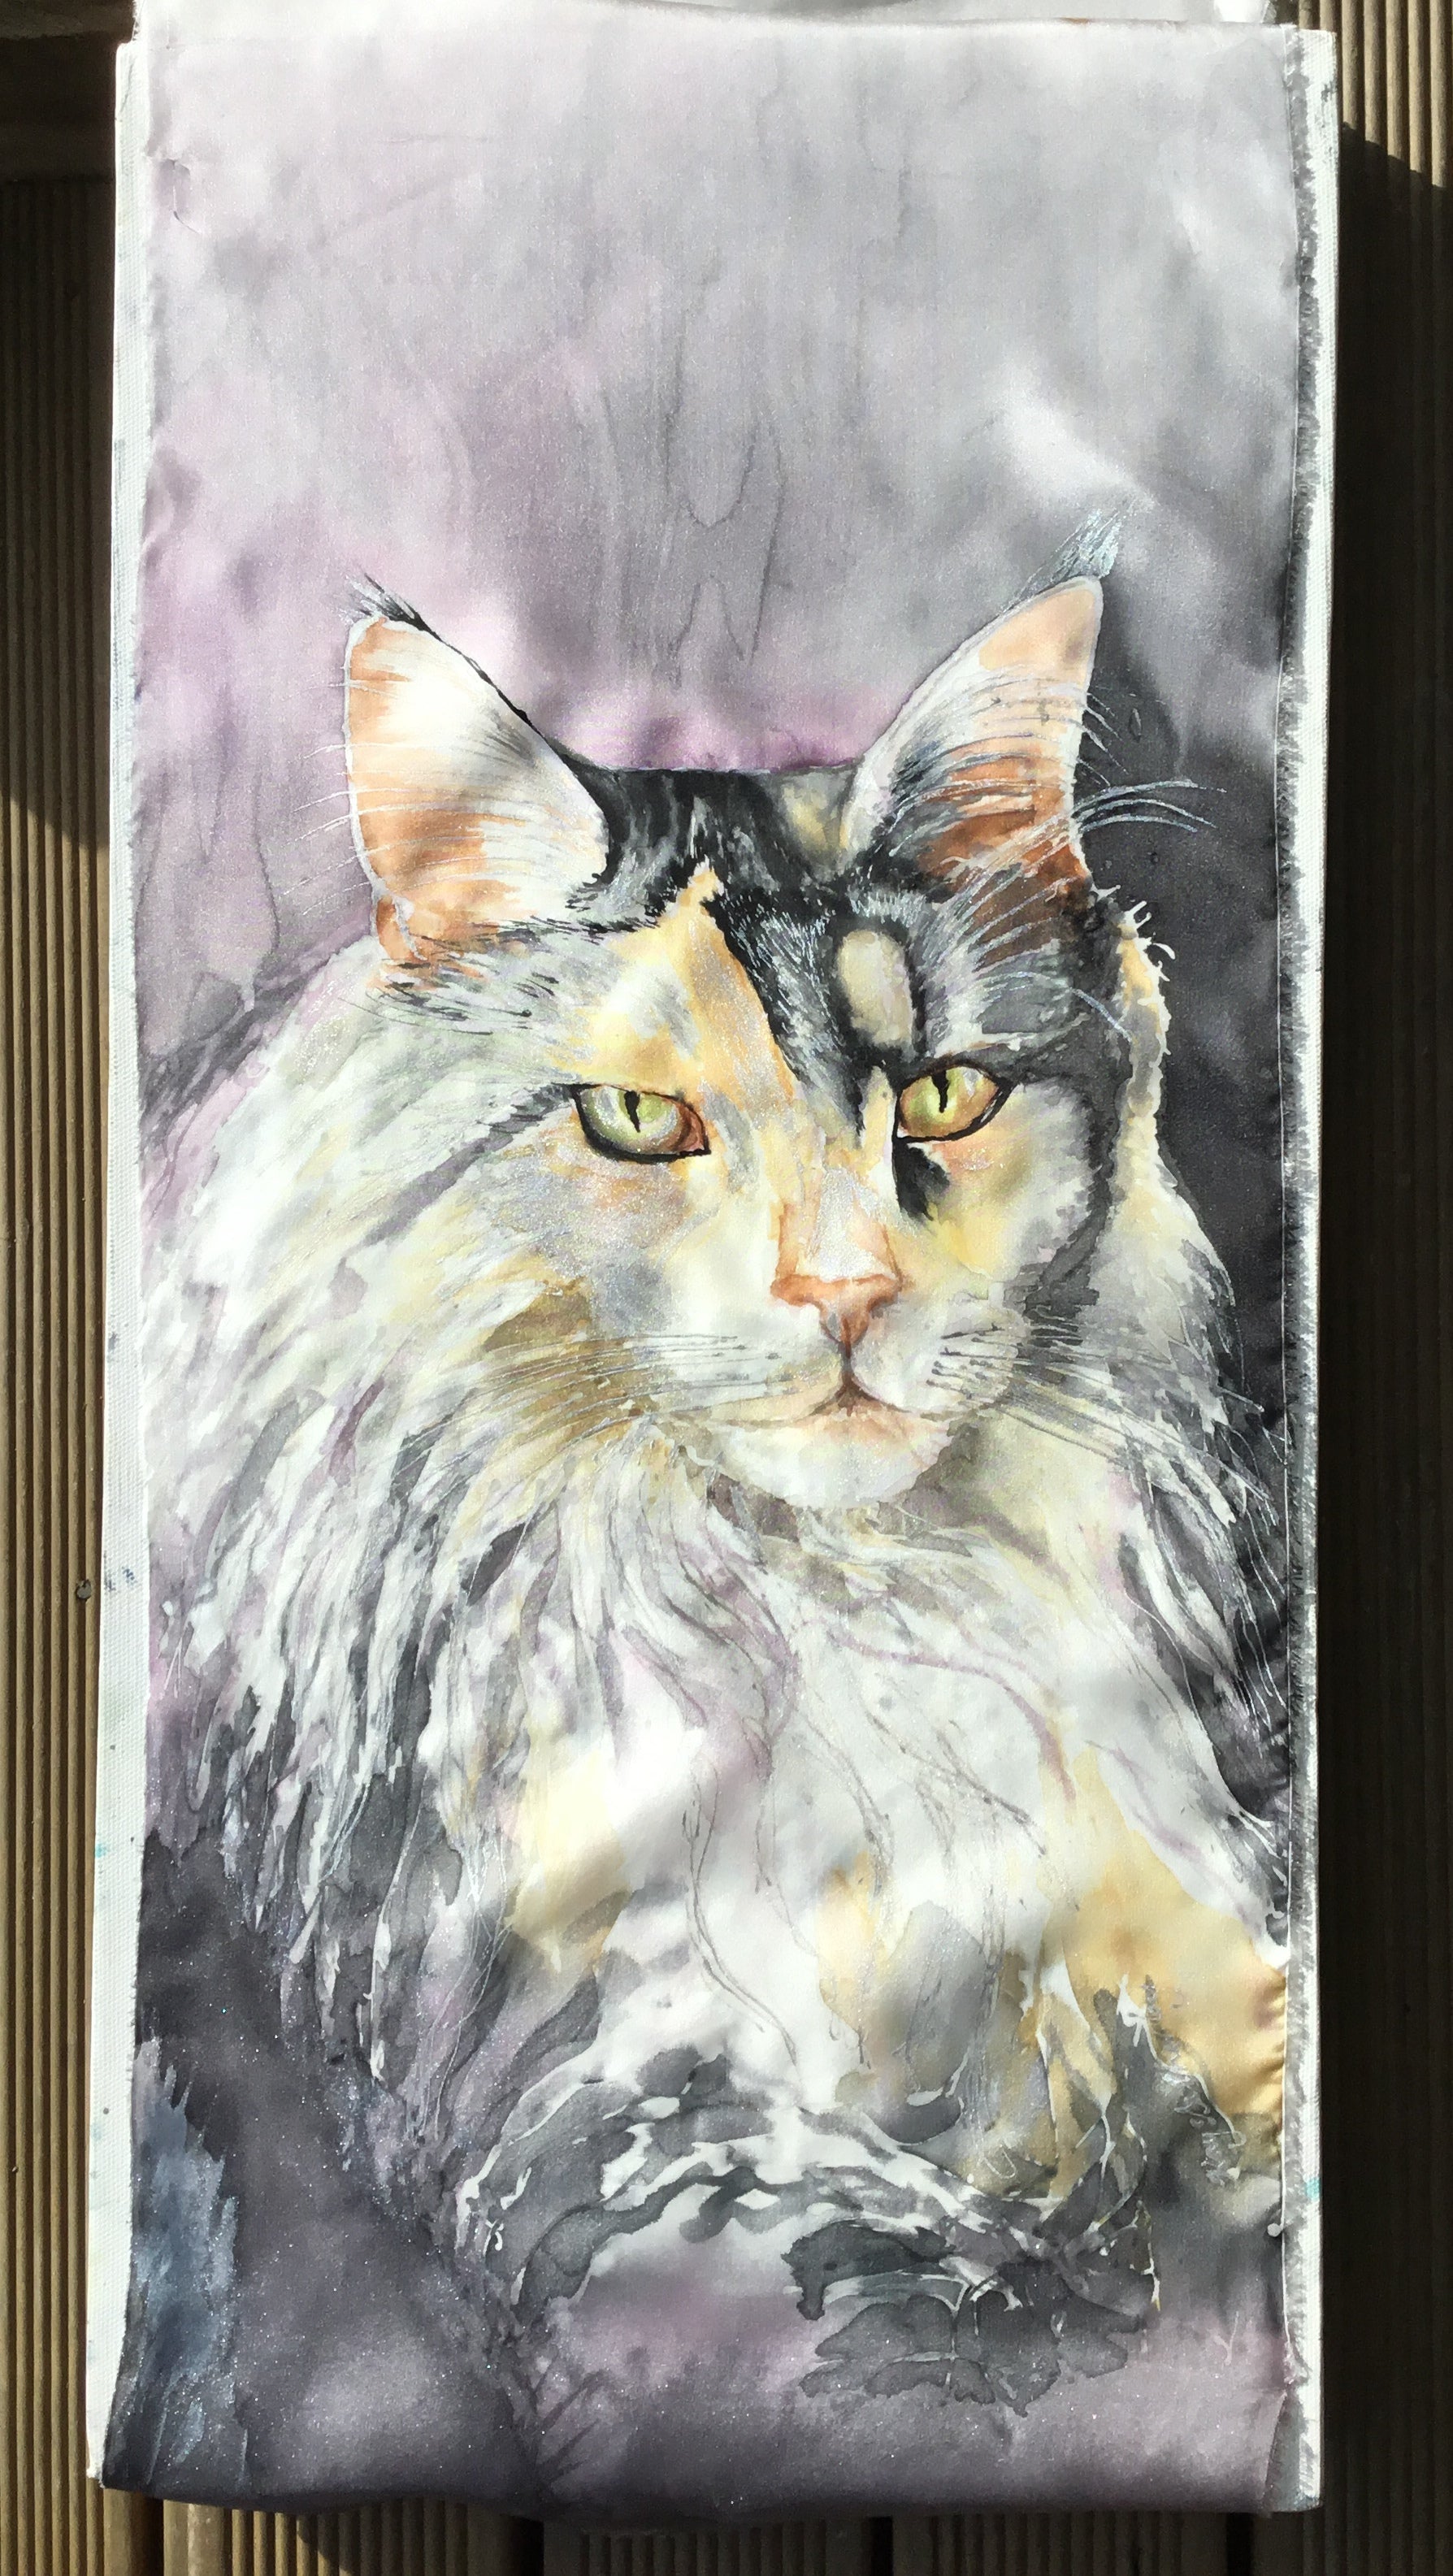 Commissioned Silk Painting of a Maine Coon cat. Bespoke Silk Art - Satherley Silks NZ